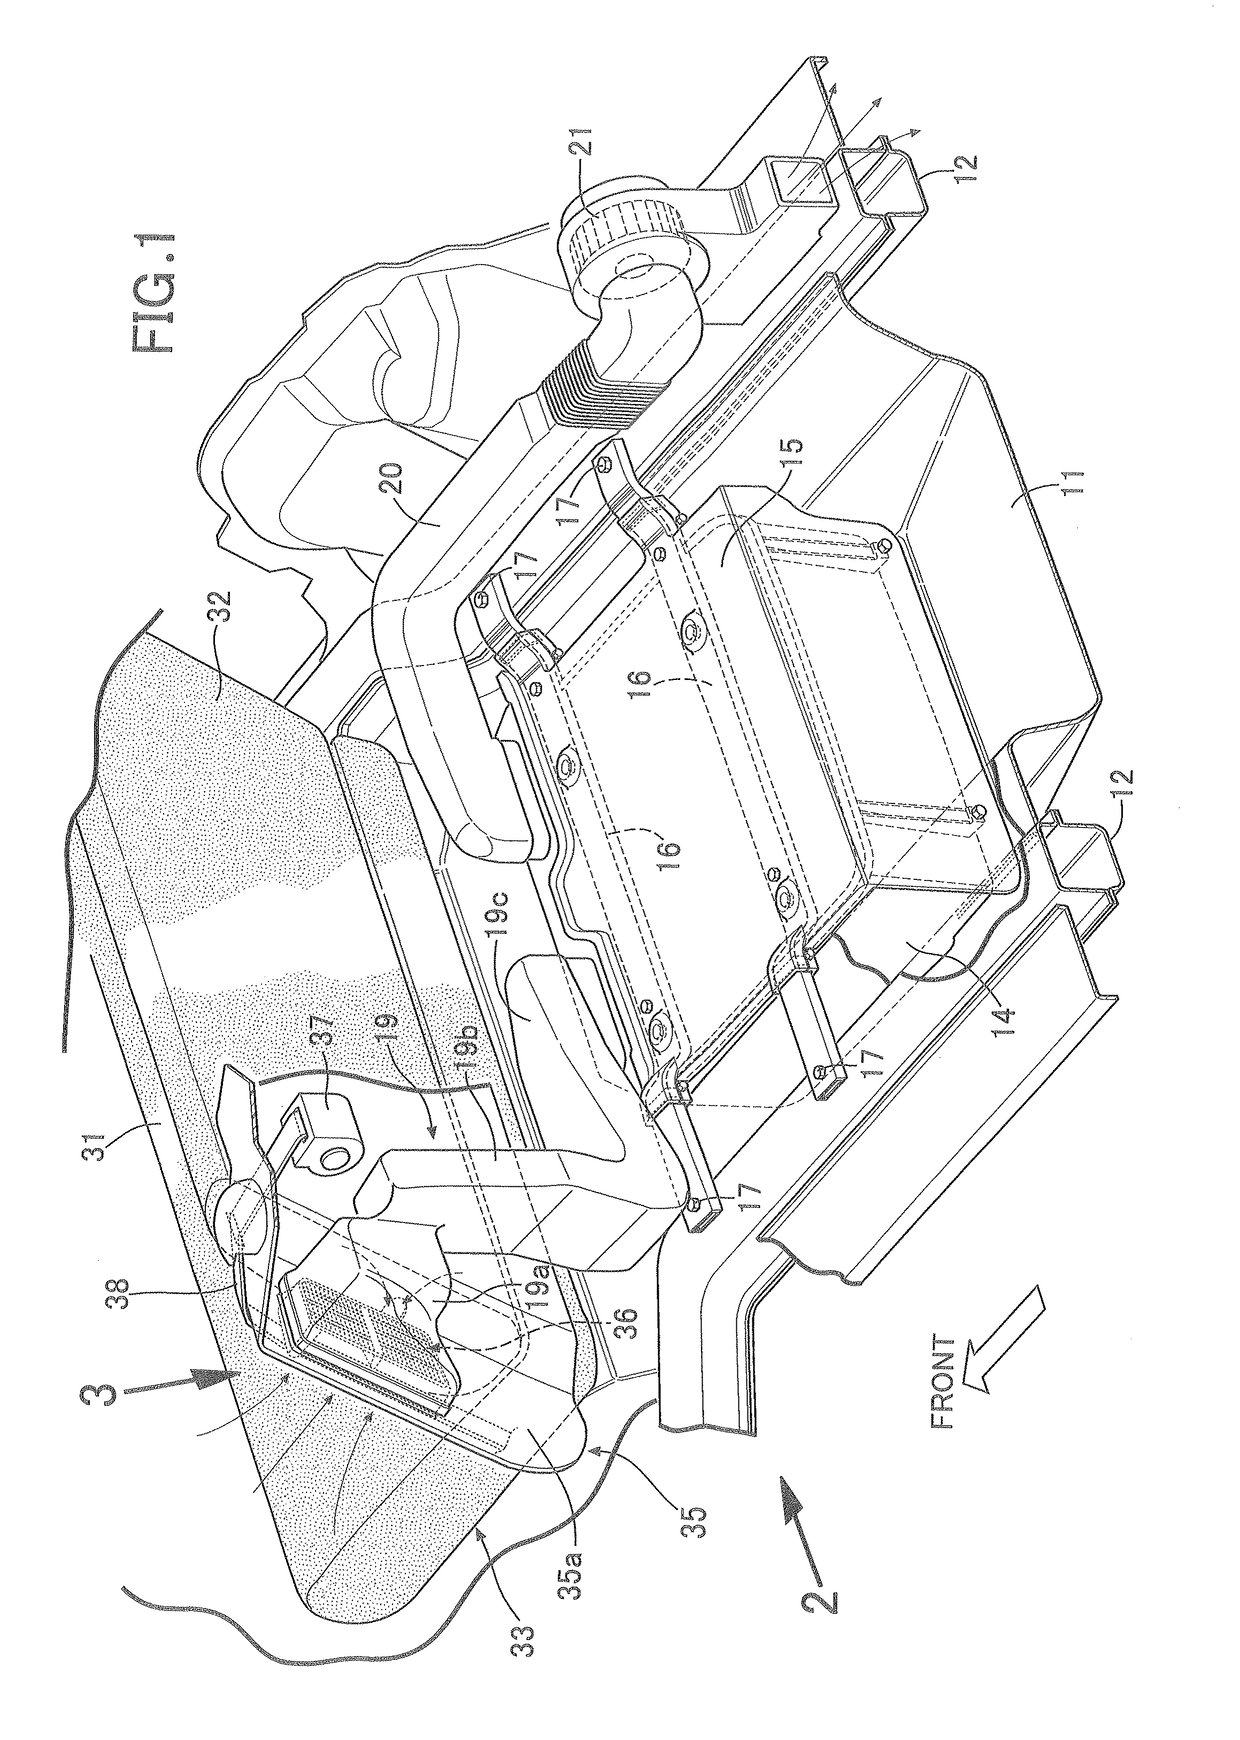 Battery cooling air intake structure